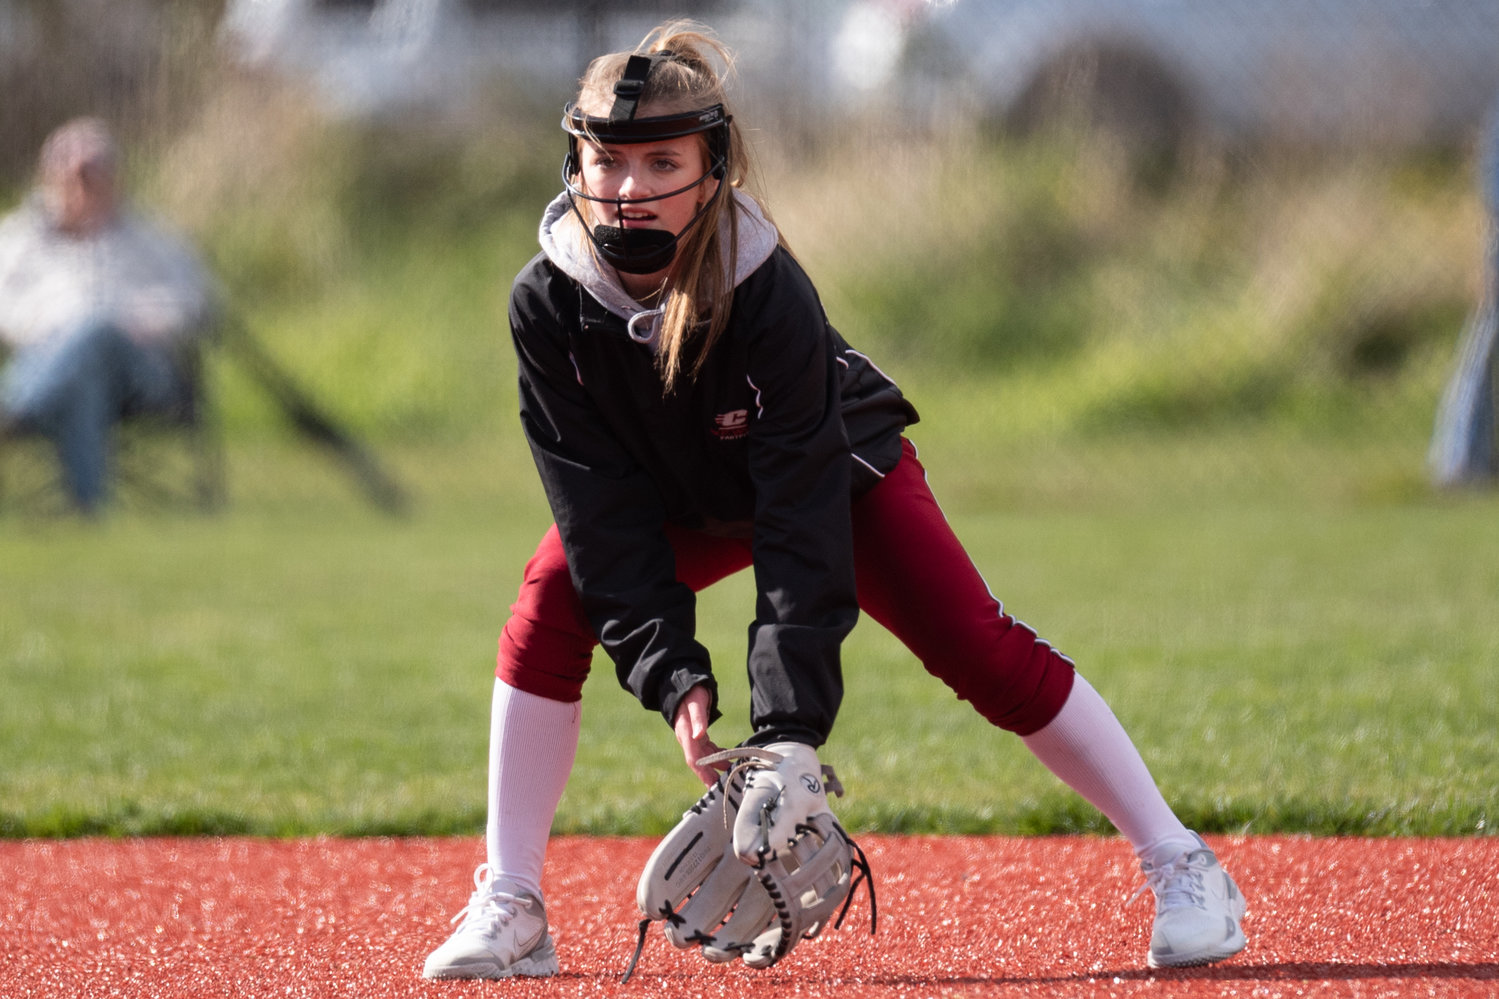 W.F. West second baseman Brielle Etter gets ready to field a ball against Tumwater at Recreation Park in Chehalis April 15.